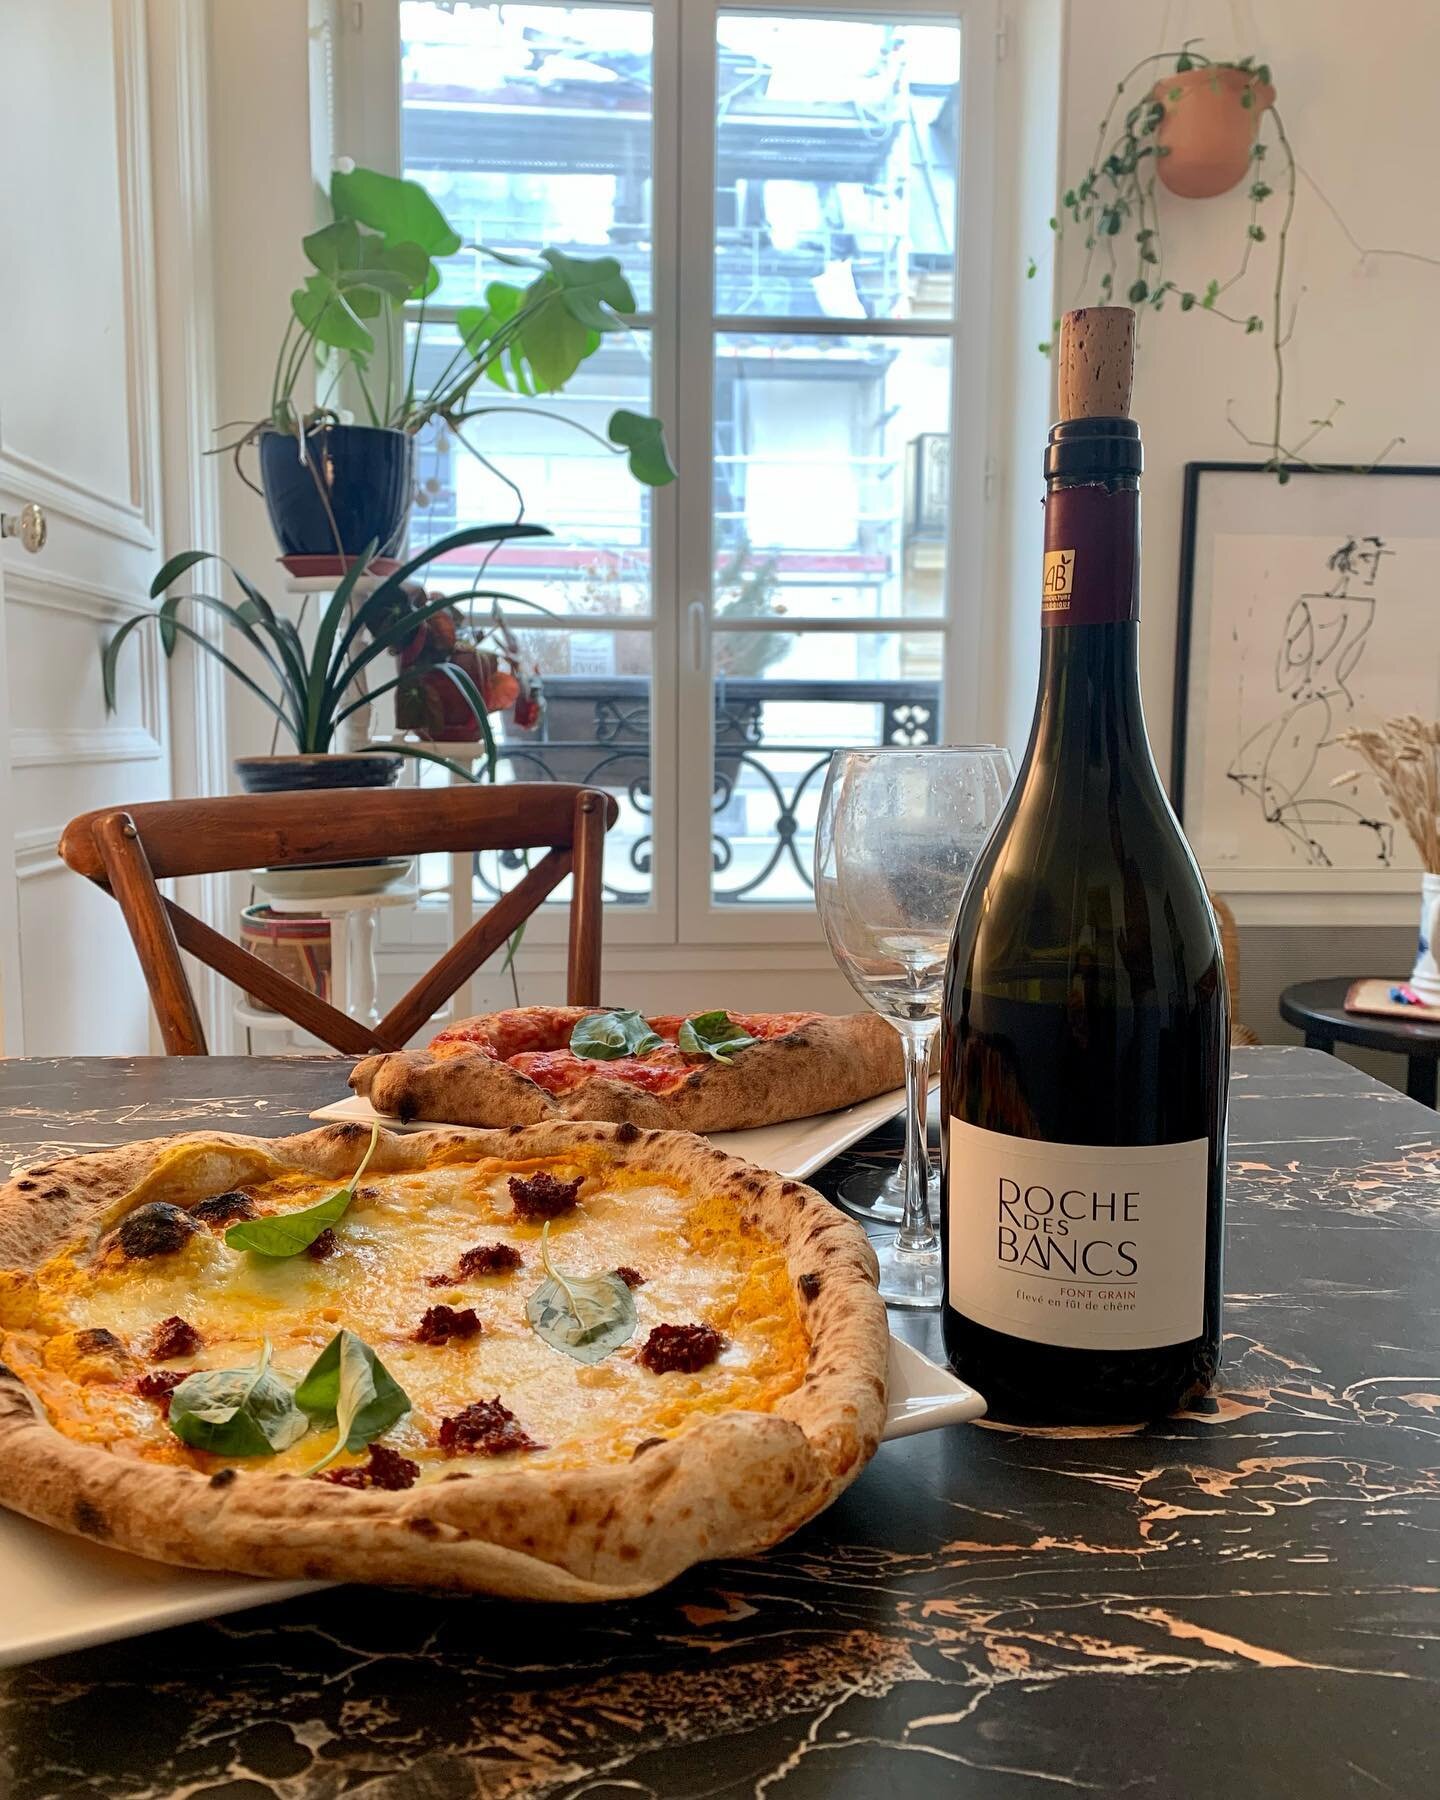 Avez qui souhaiterais-tu partager ce déjeuner ? Tag la personne en commentaire 🍷✨❤️ 

Who would you like to share this lunch with?  Tag the person in comment 🍷✨❤️

#rochedesbancs #vigneronsengagés #rvf #lunchtime #biowines #bourgognewine